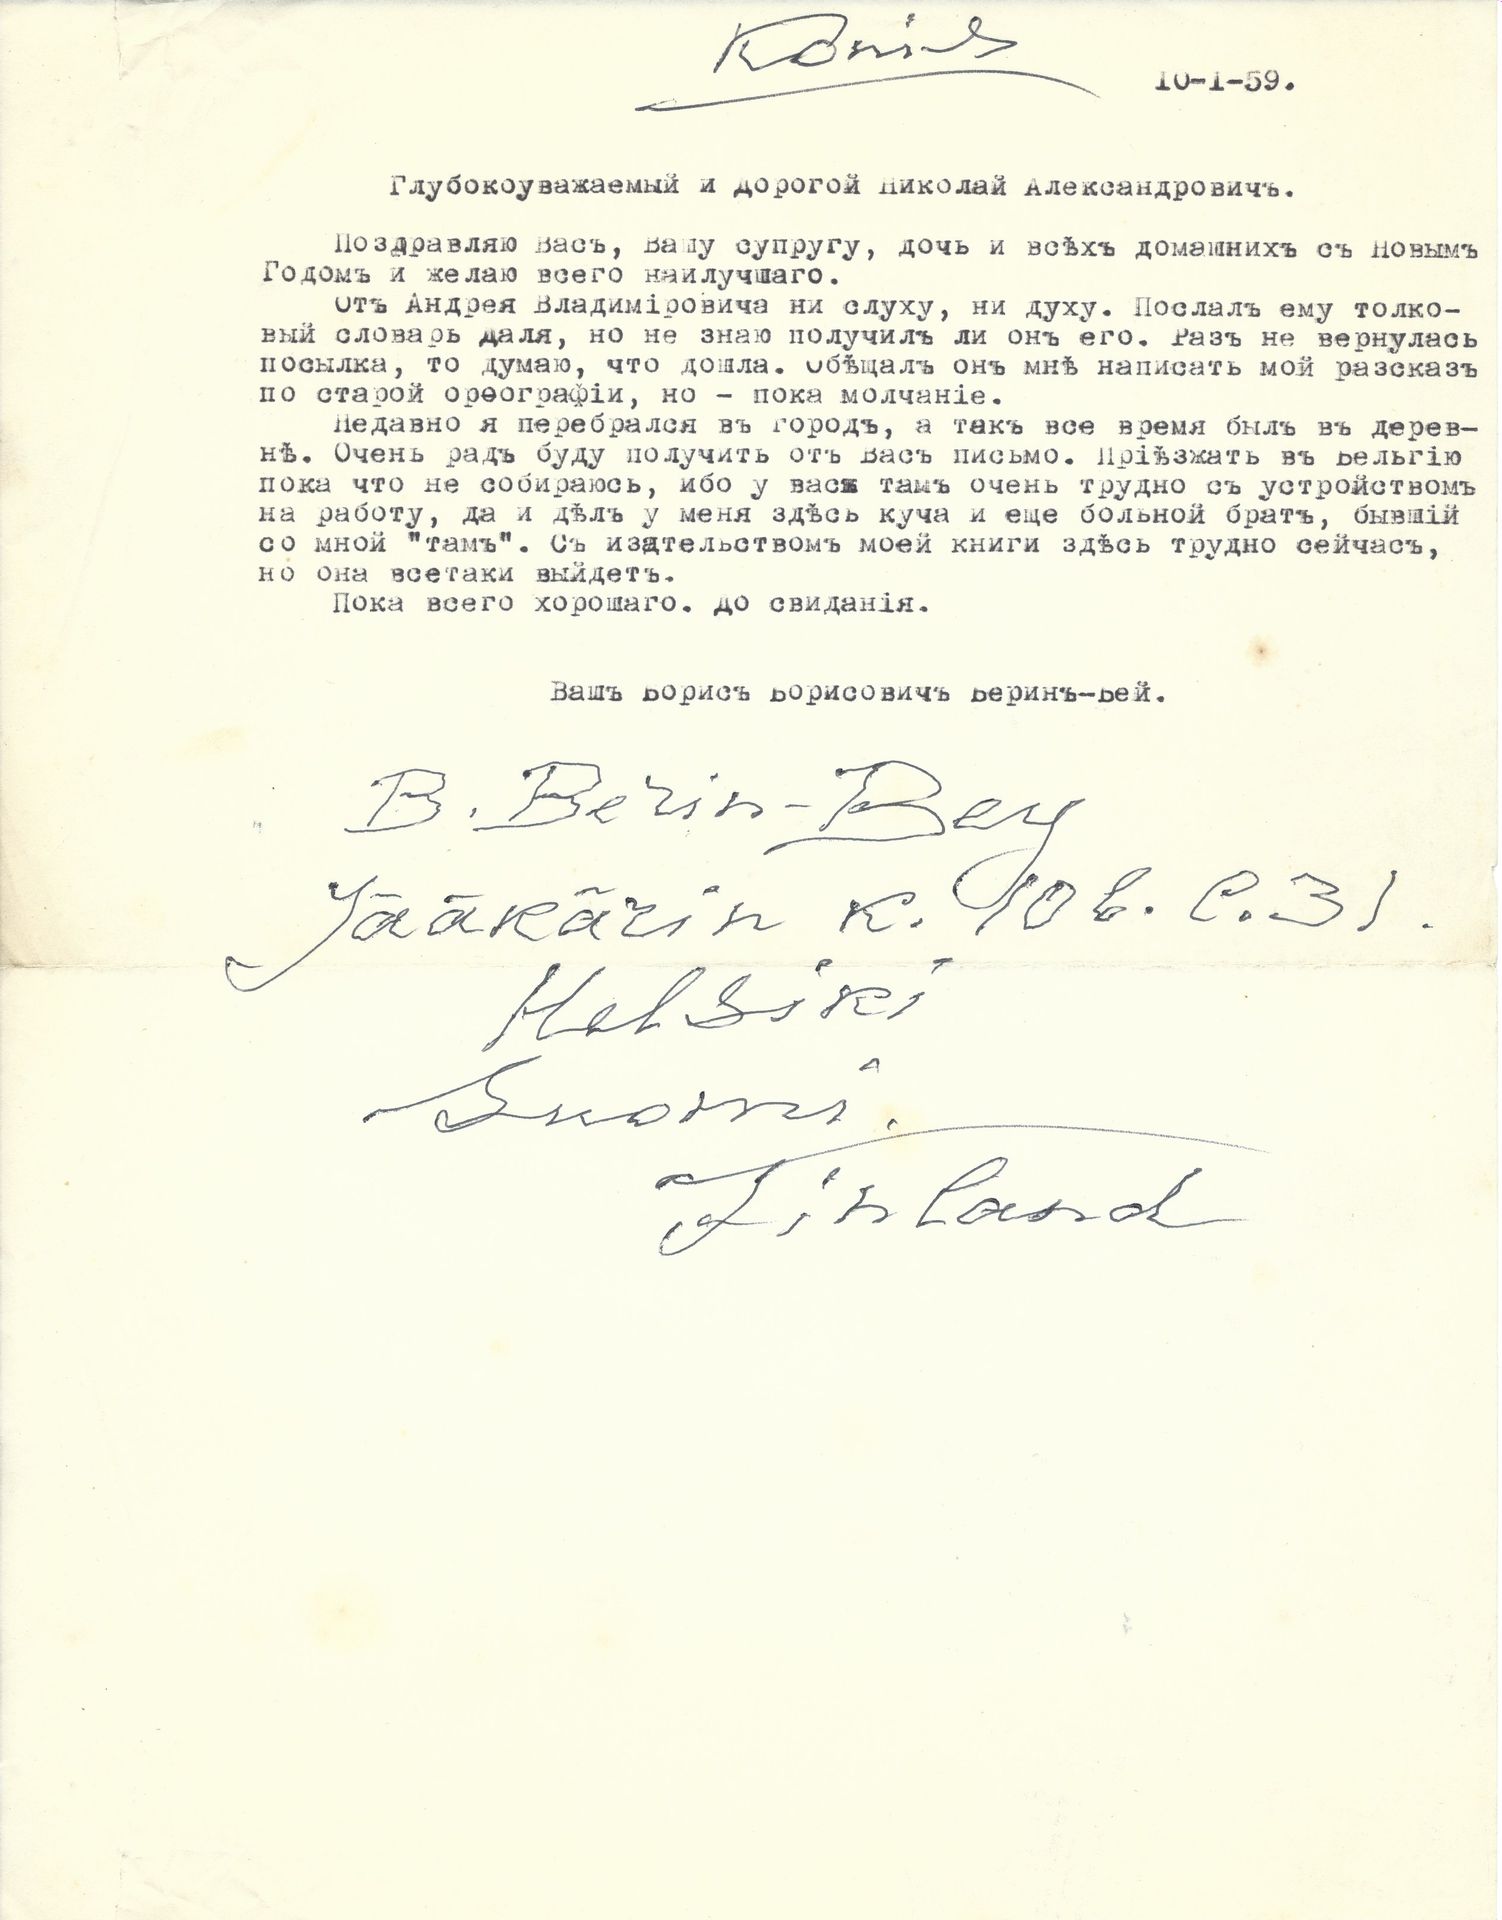 Null ARCHIVE of BERIN-BEI (Popper) Boris (1904-1968?) - Autograph

ARCHIVES of A&hellip;